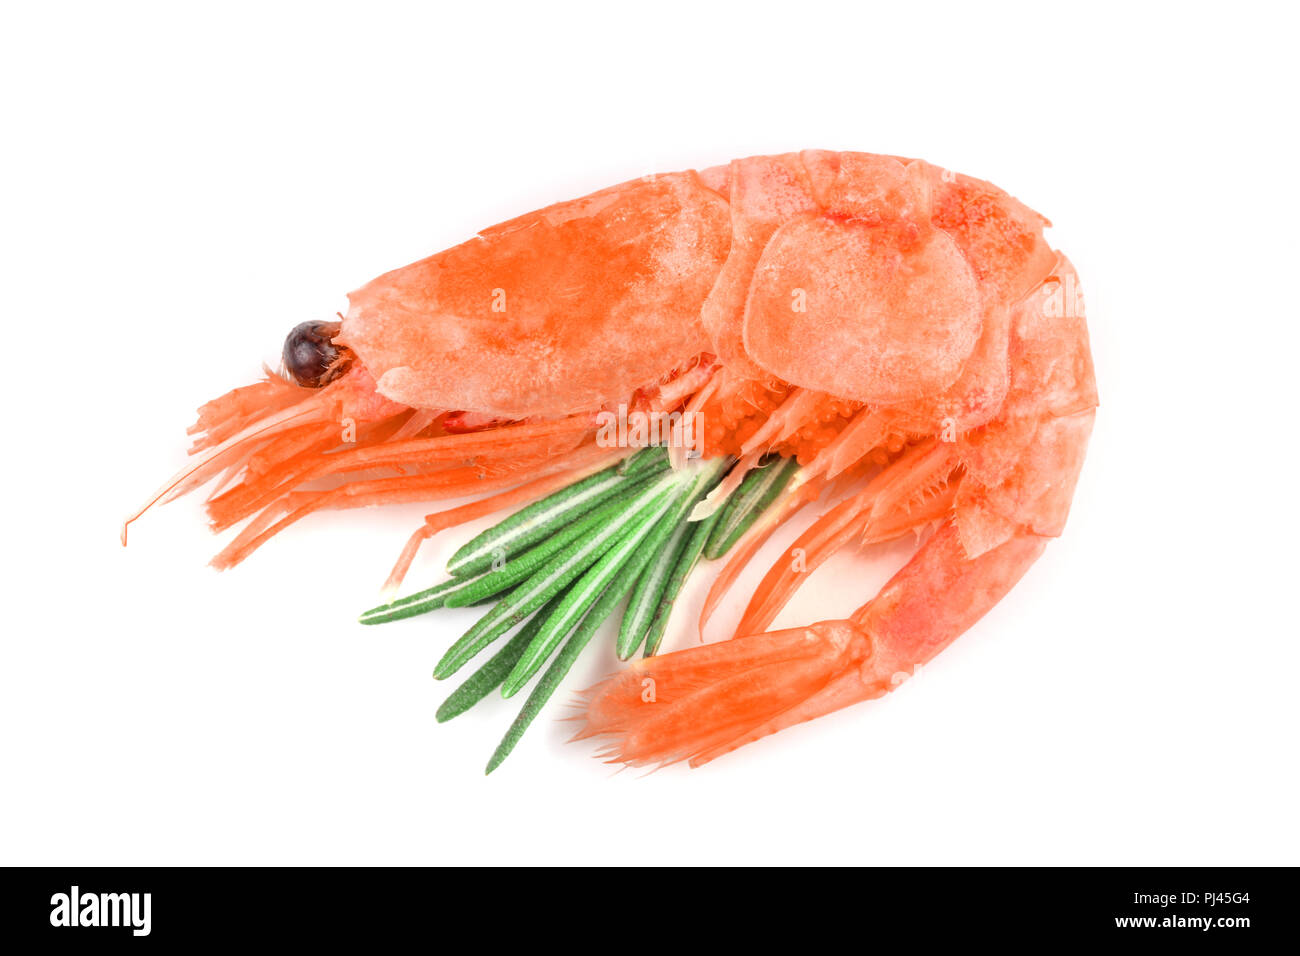 Red cooked prawn or shrimp with rosemary isolated on white background Stock Photo